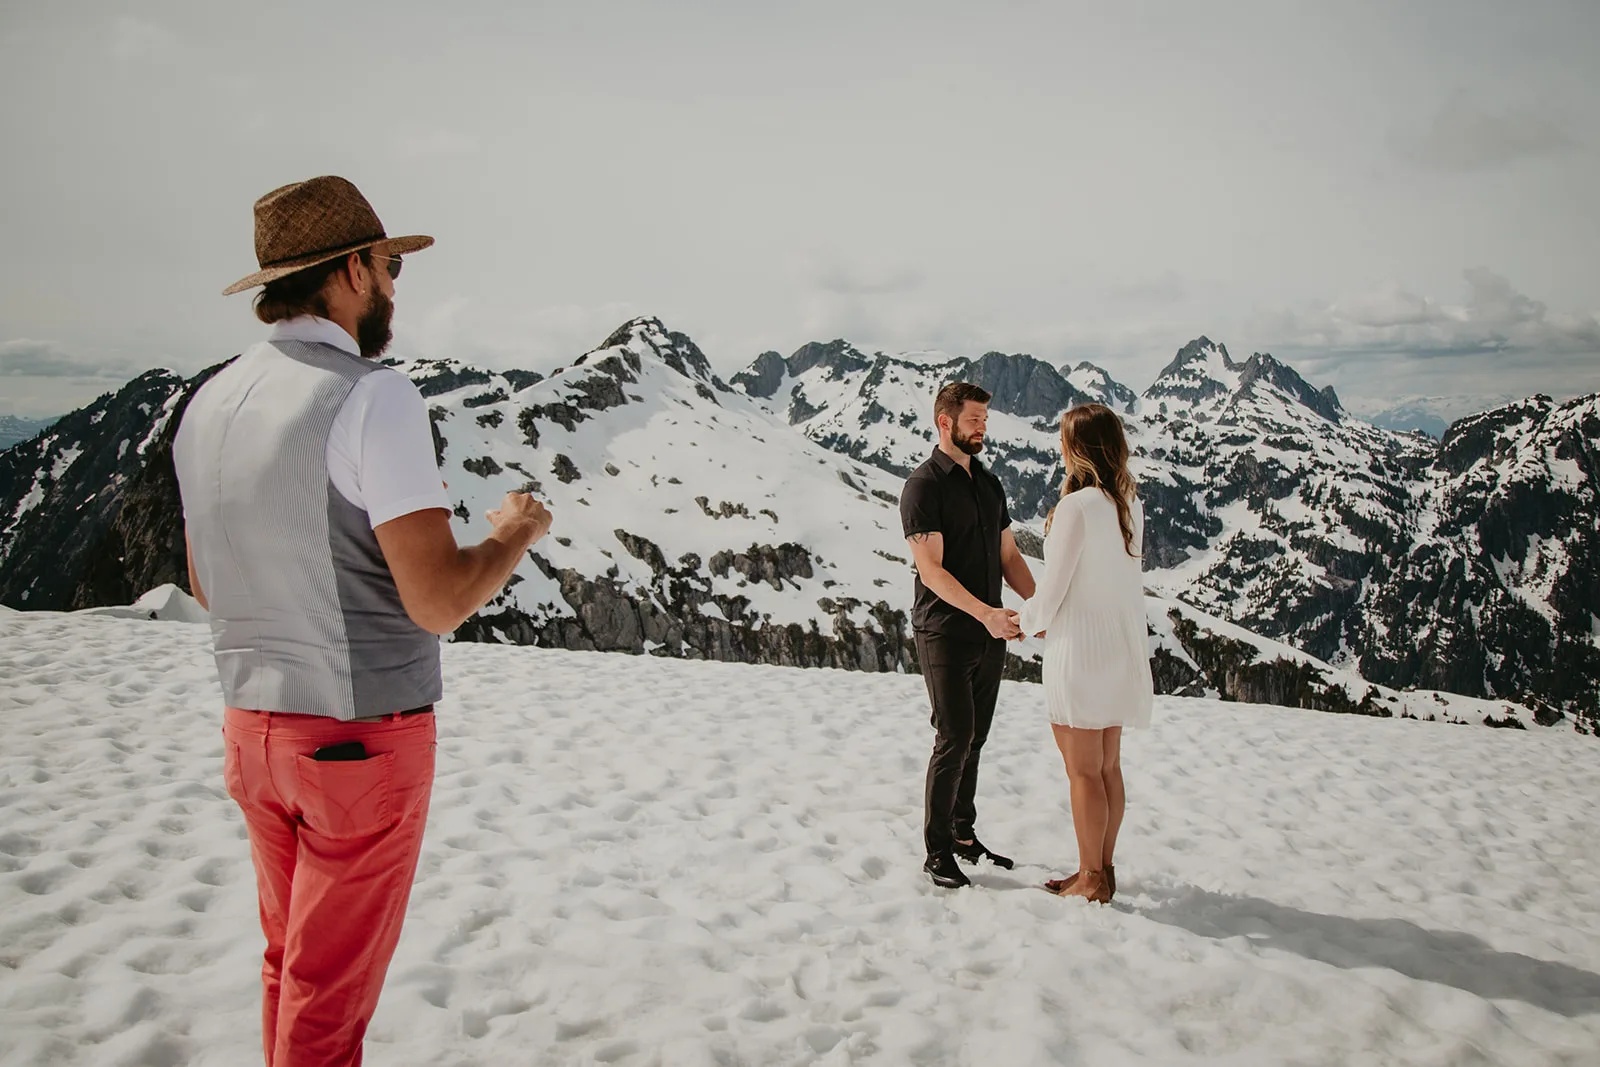 Shawn Miller officiating a helicopter elopement ceremony